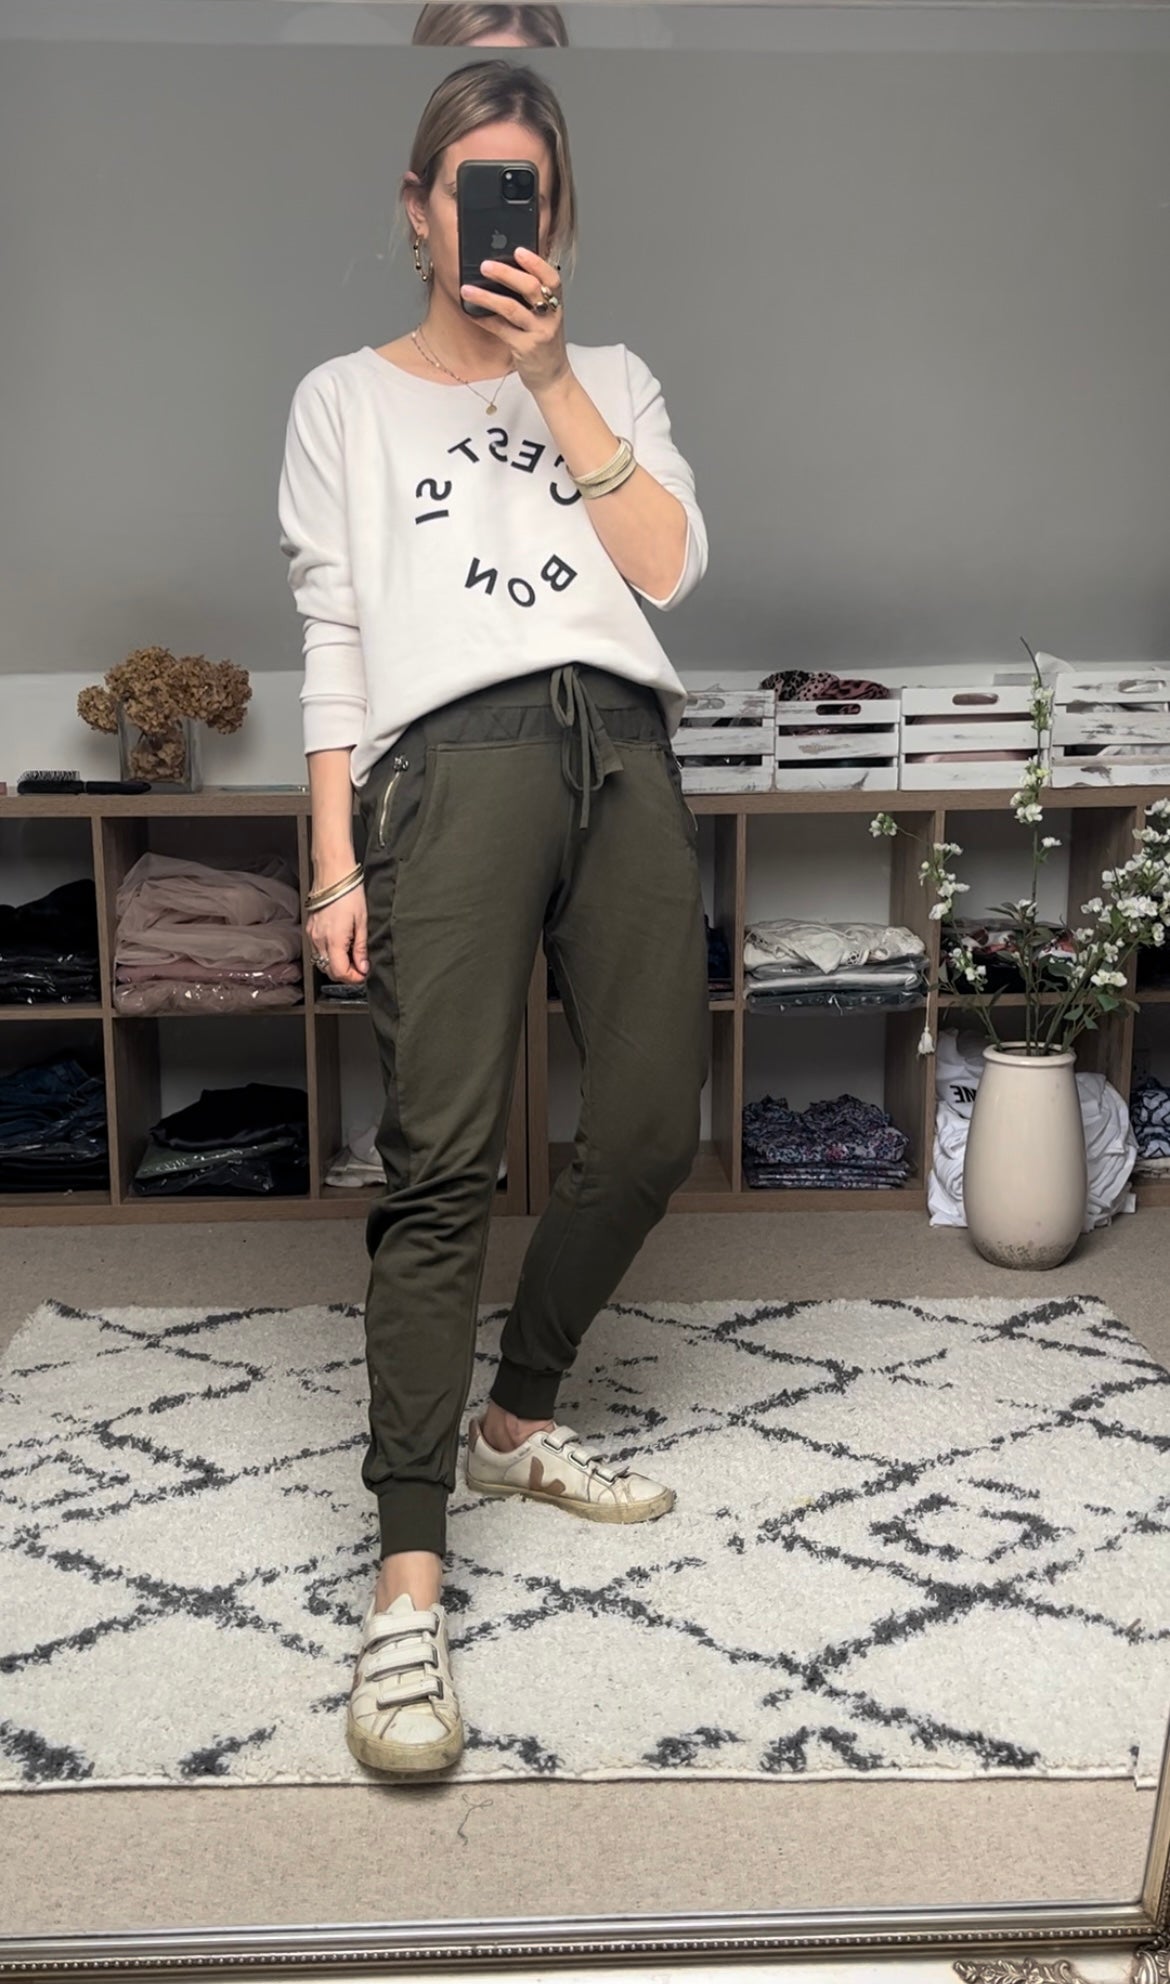 Ultimate joggers in olive